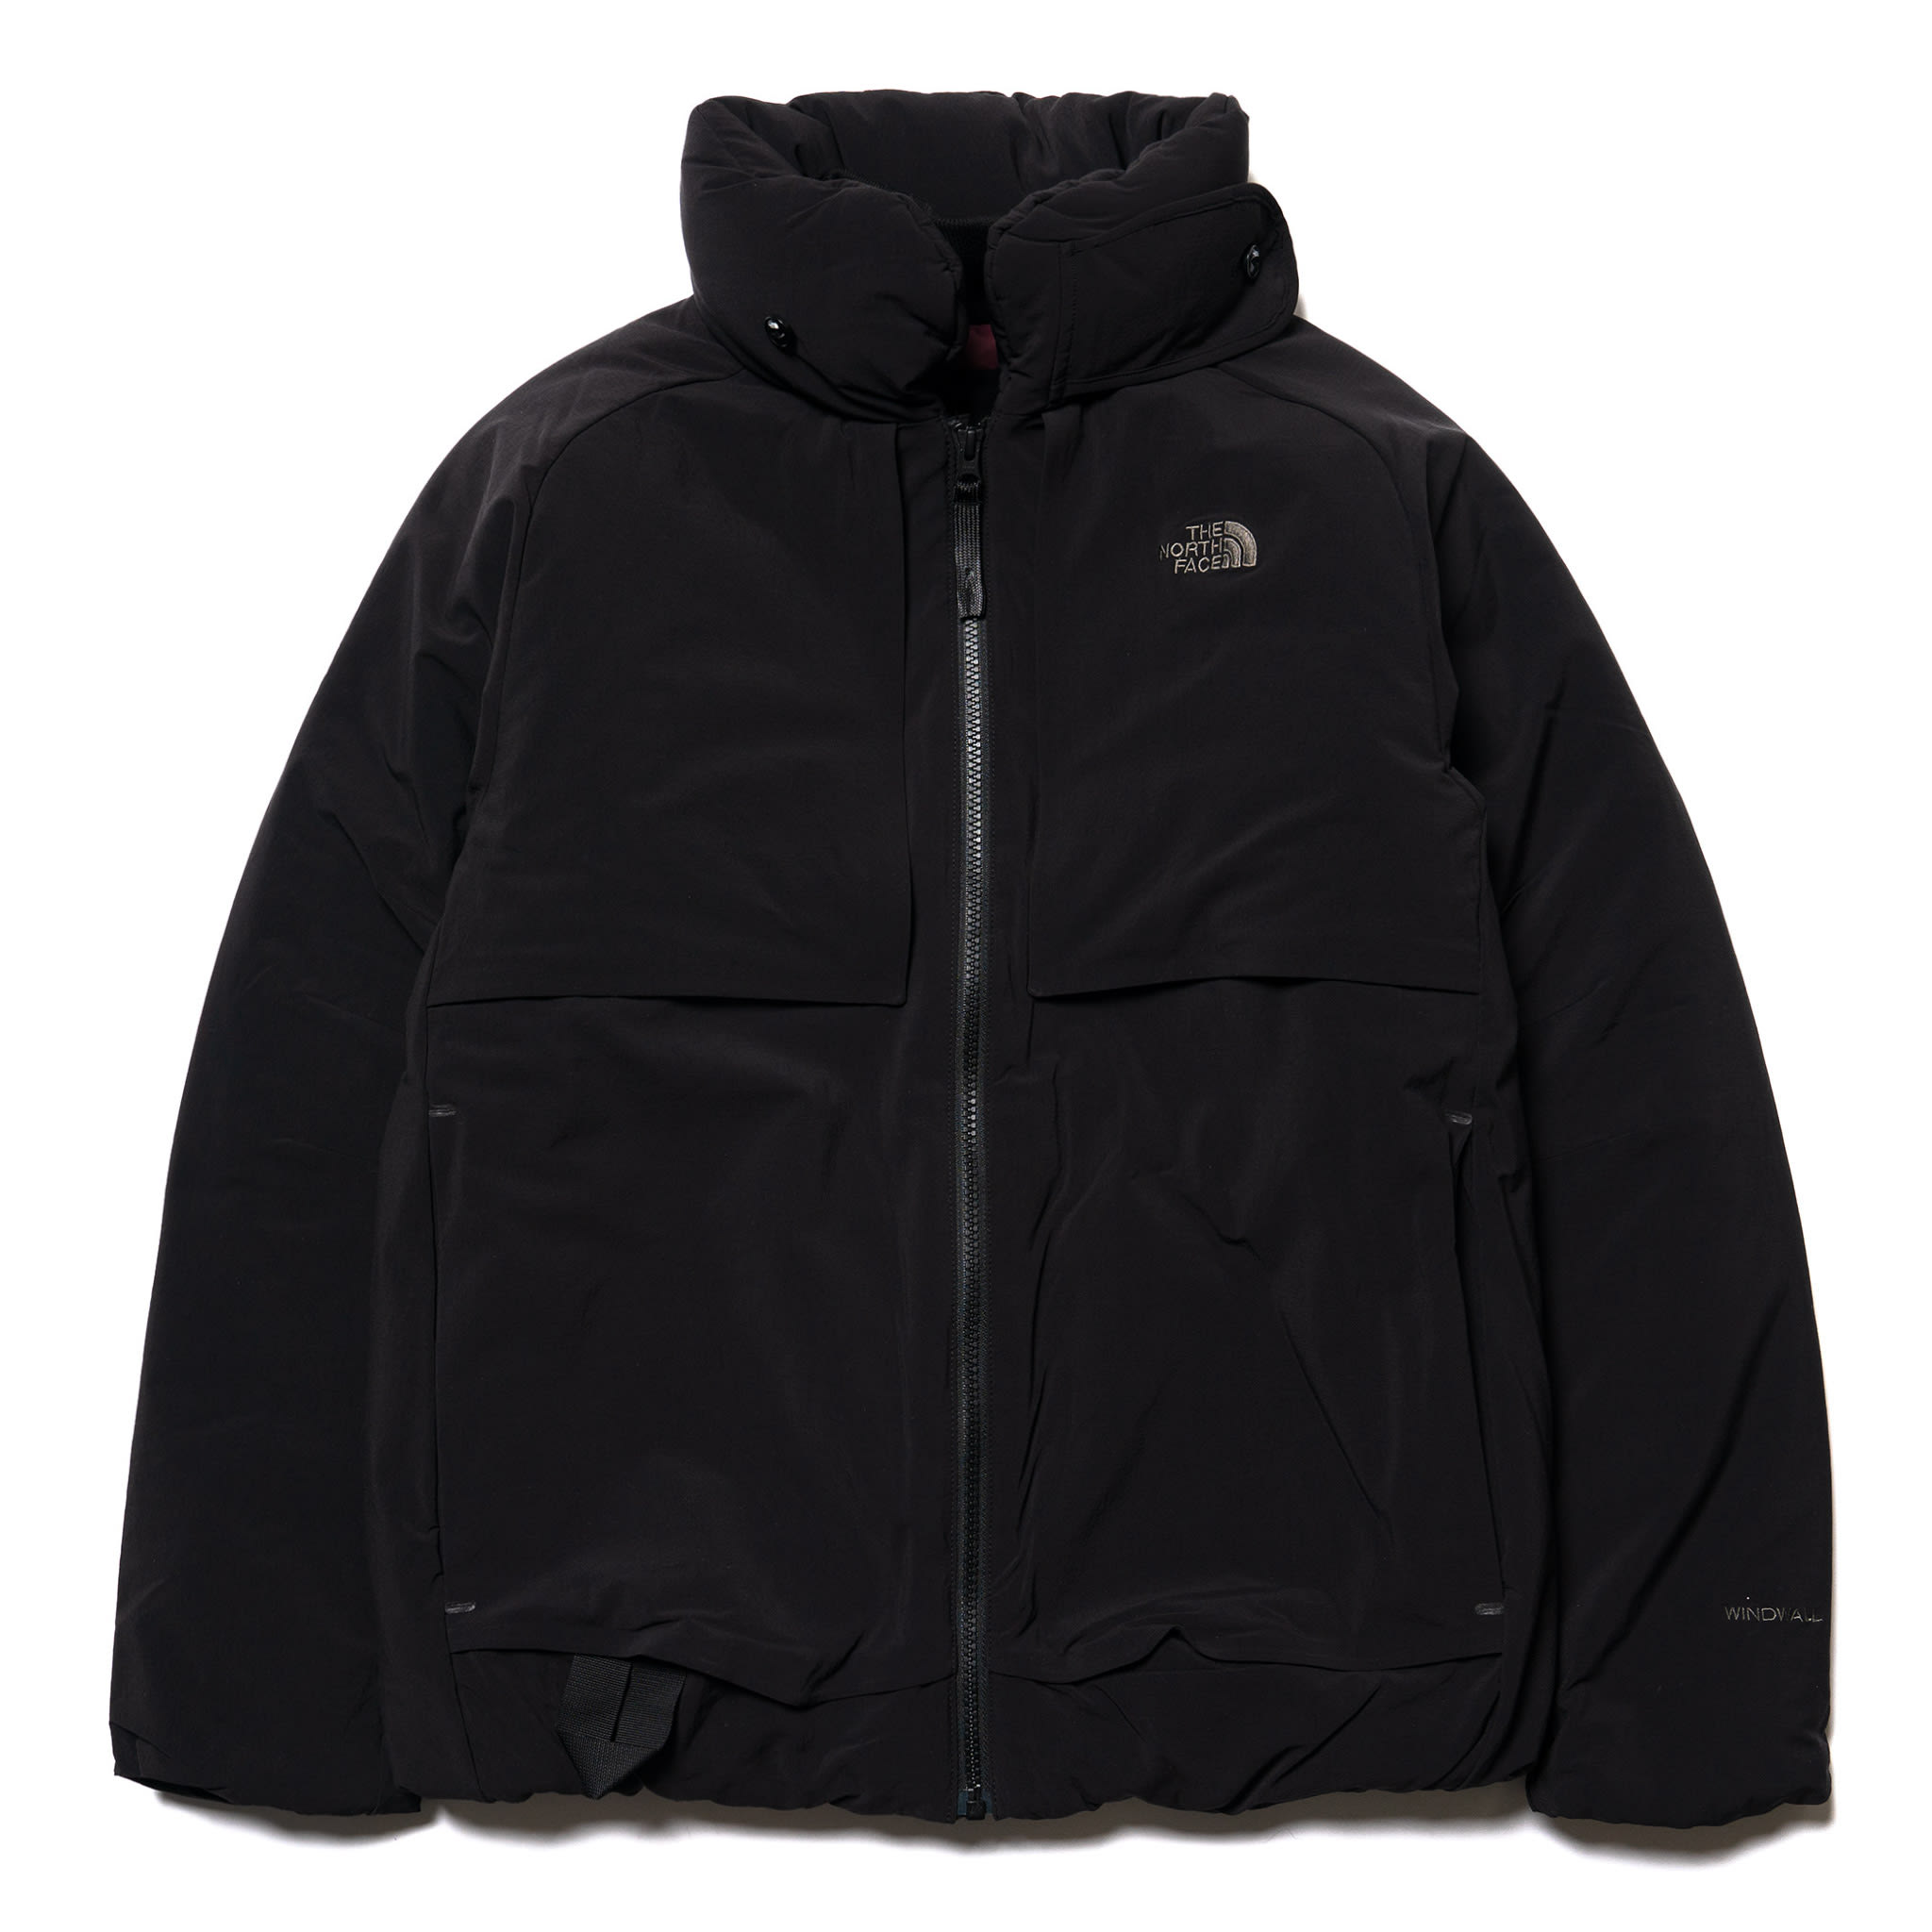 The North Face expands its Black Series 